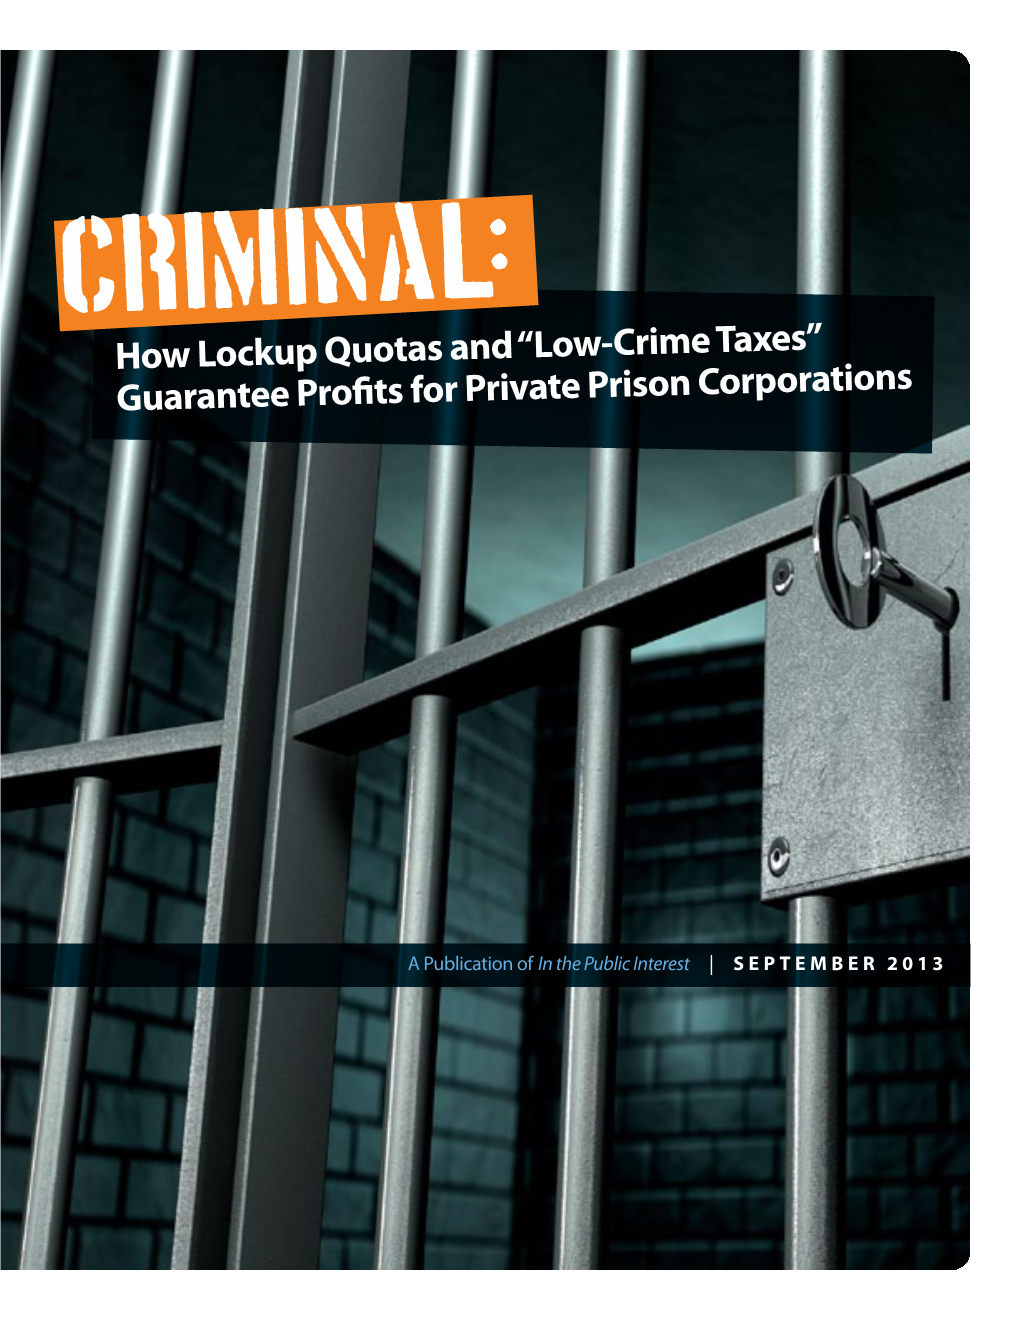 Lockup Quotas and “Low-Crime Taxes” Guarantee Profits for Private Prison Corporations